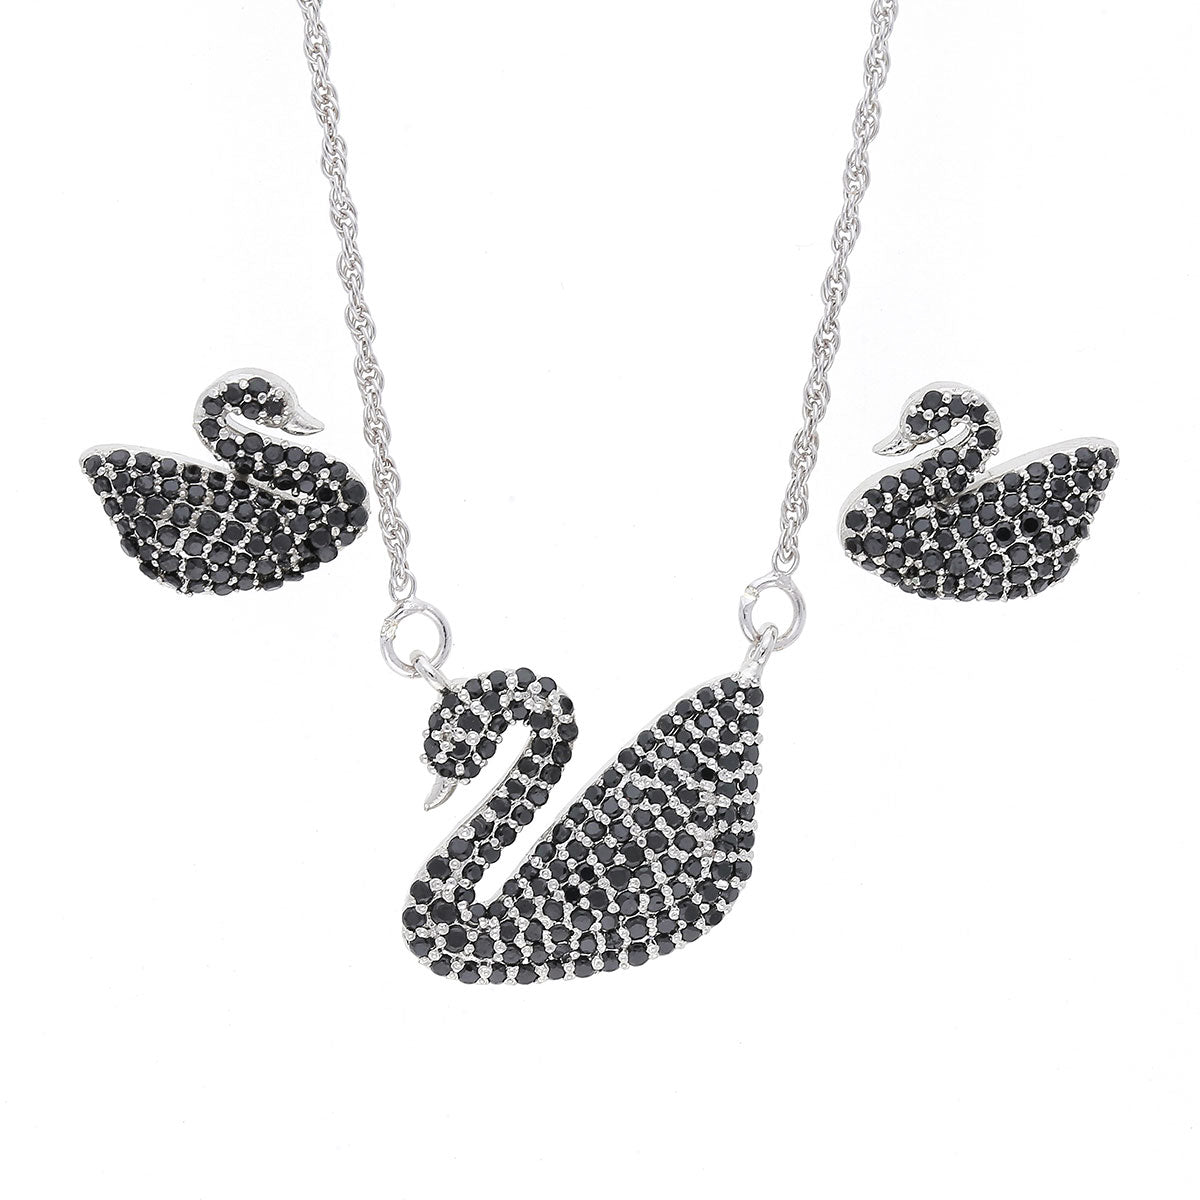 REGALIE Rose Gold Plated Black Diamond Studded Swan Pendant Swarovski  Inspired Necklace for Women and Girls- Ideal for Gifting Purpose :  Amazon.in: Fashion